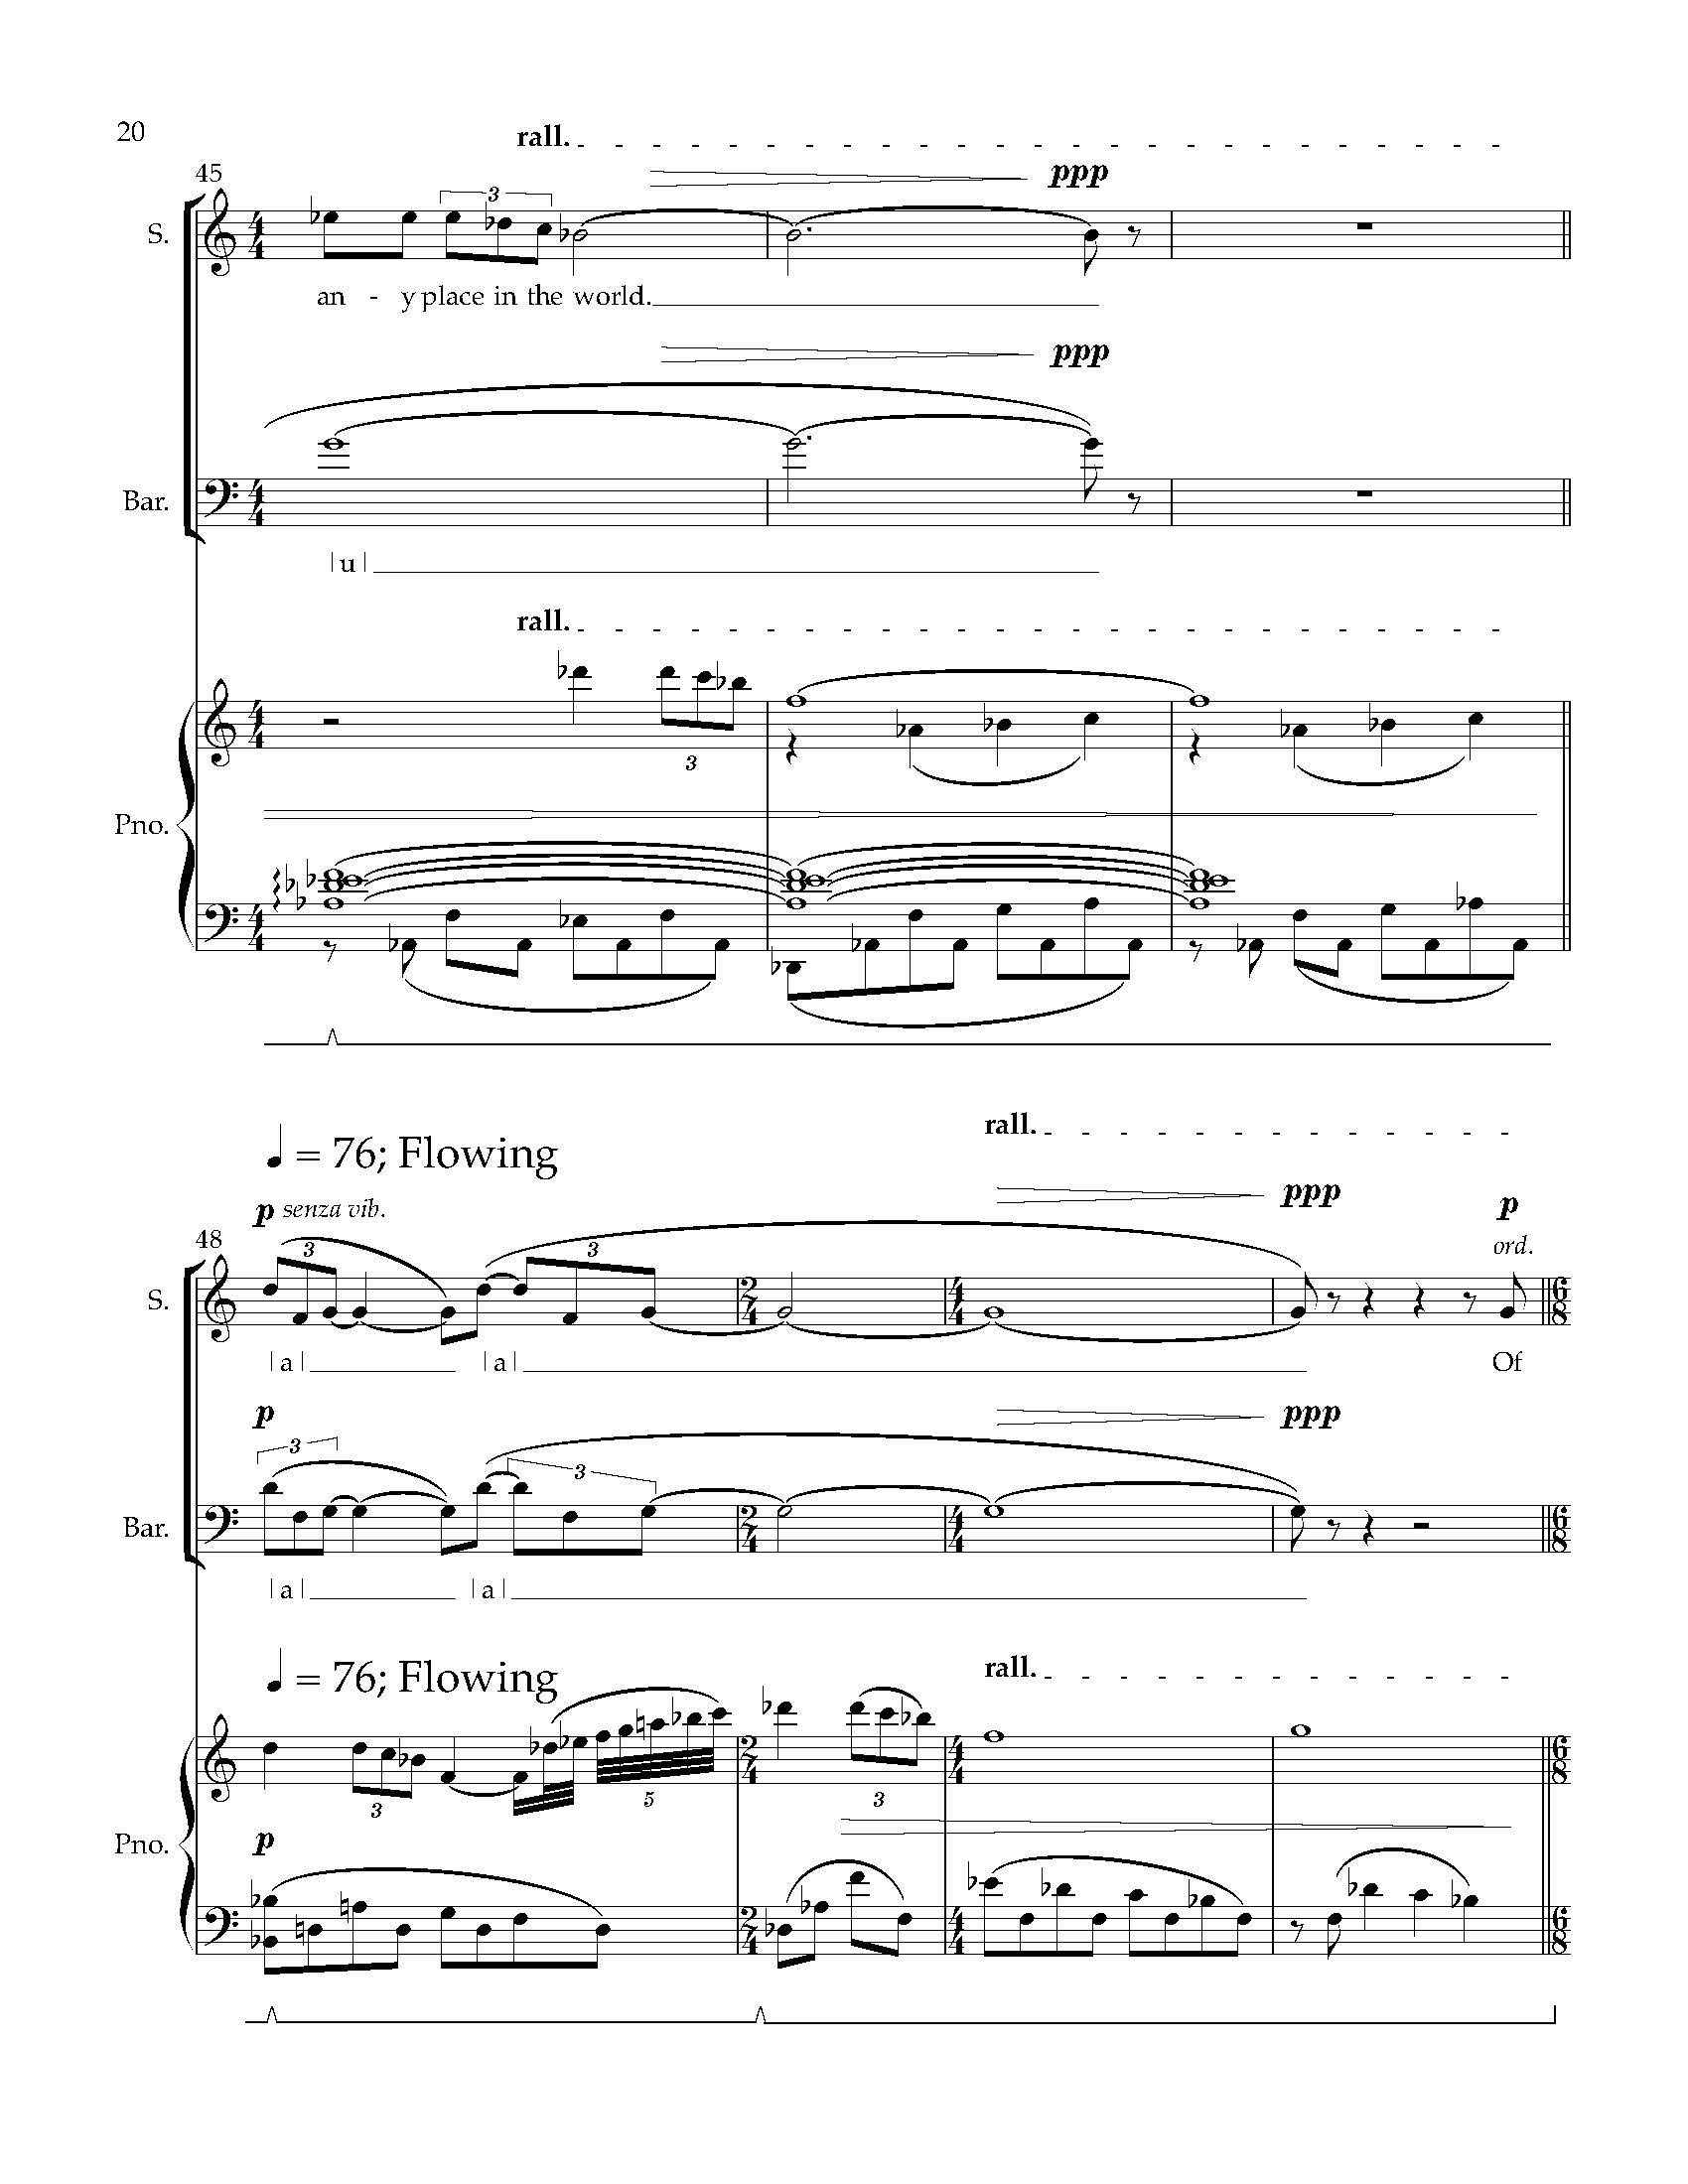 Sky - Complete Score (Revised)_Page_26.jpg